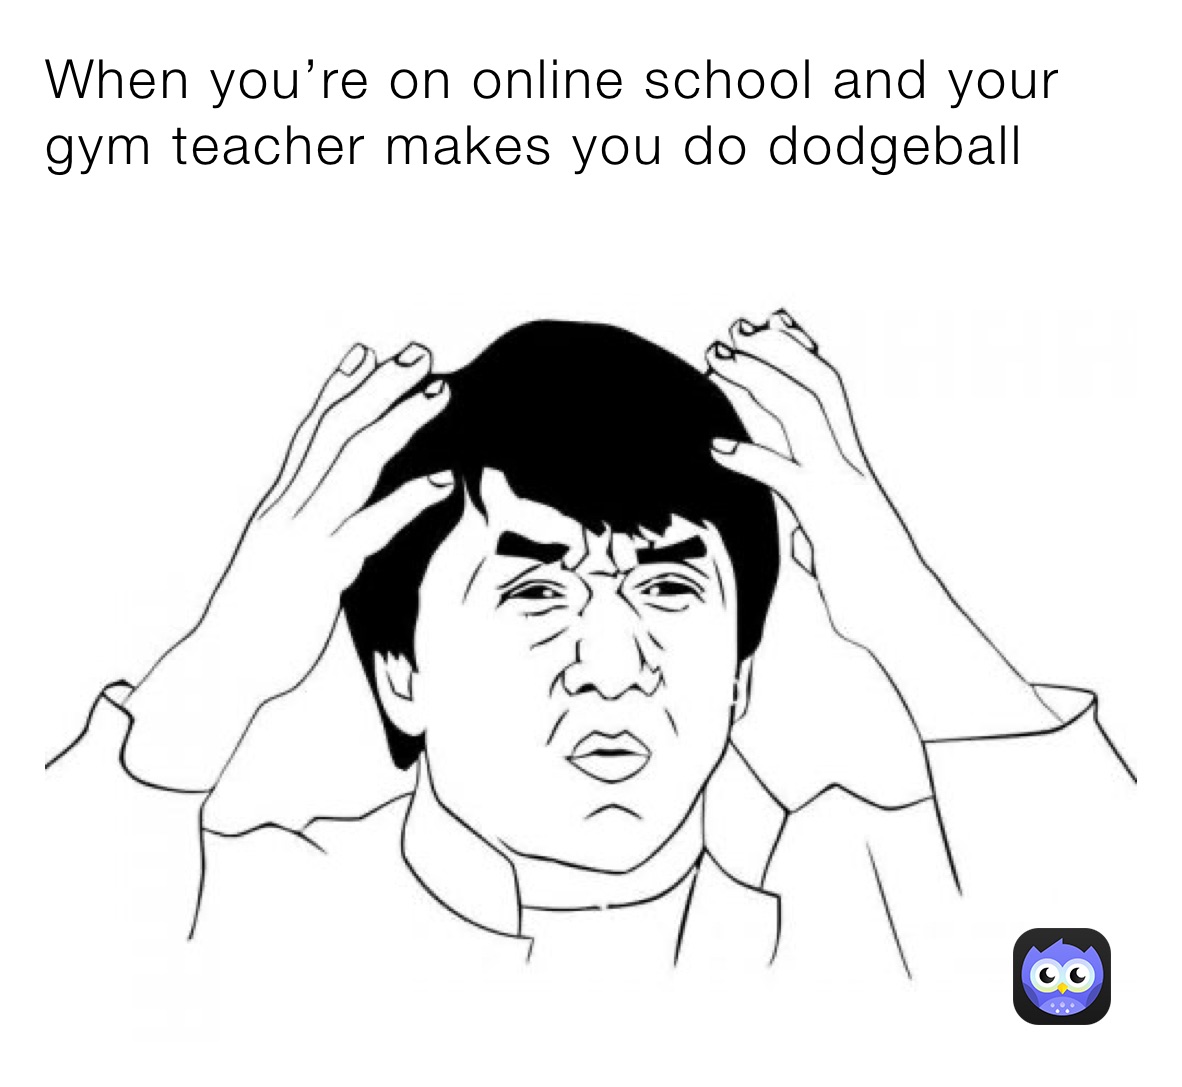 When you’re on online school and your gym teacher makes you do dodgeball￼